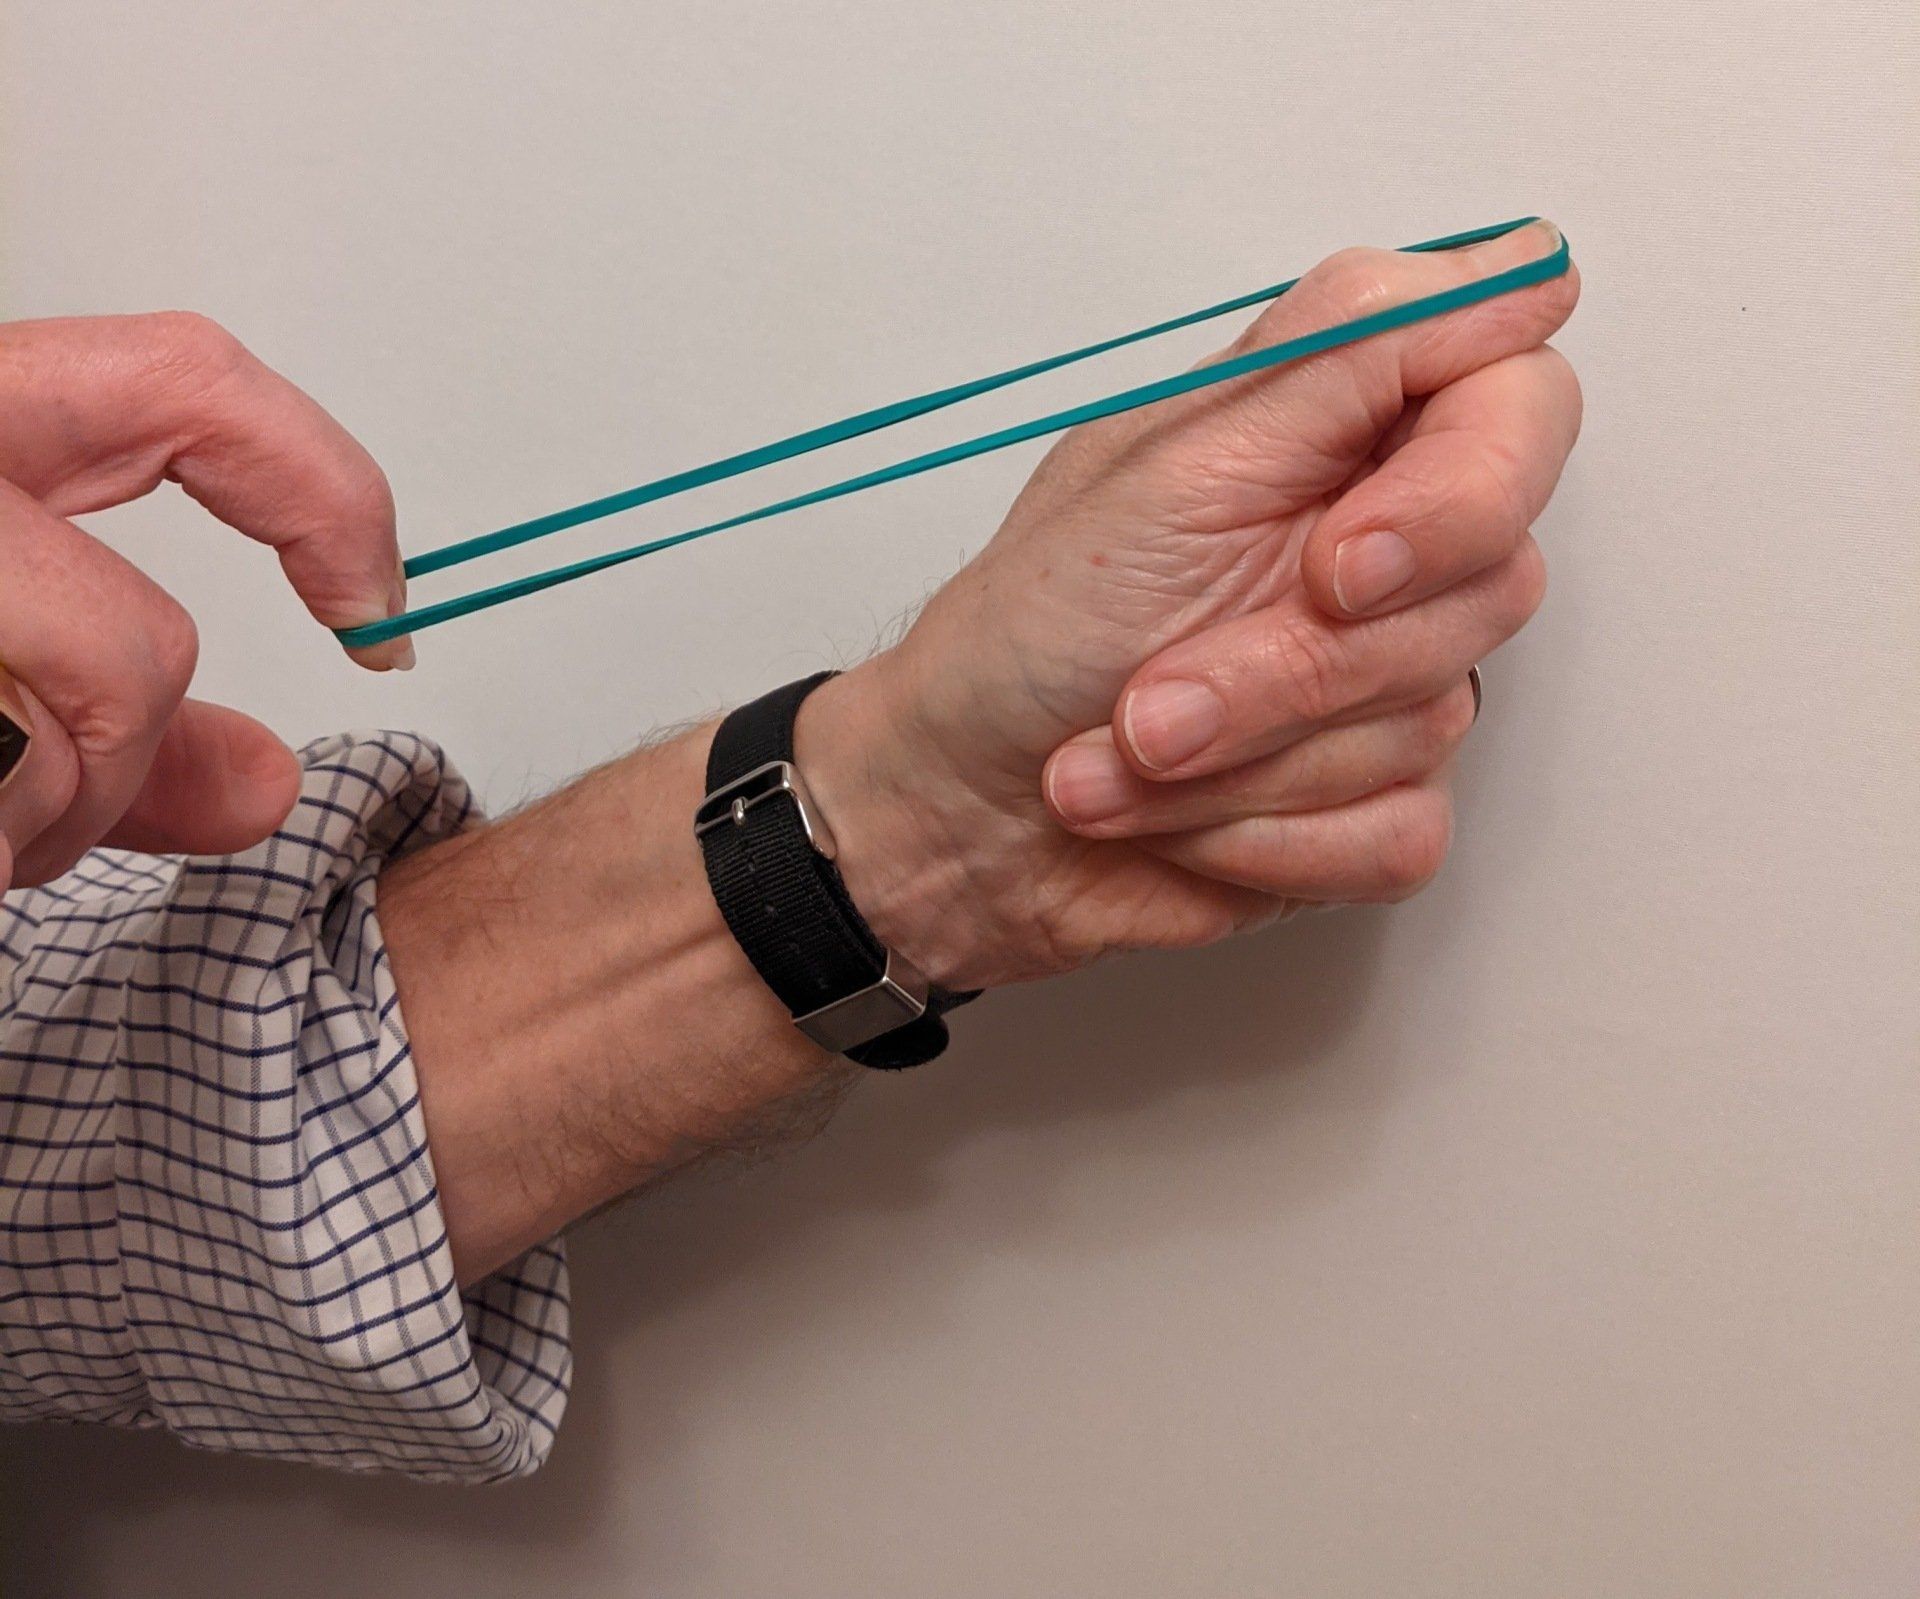 Hands holding an elastic band that is about to be flicked